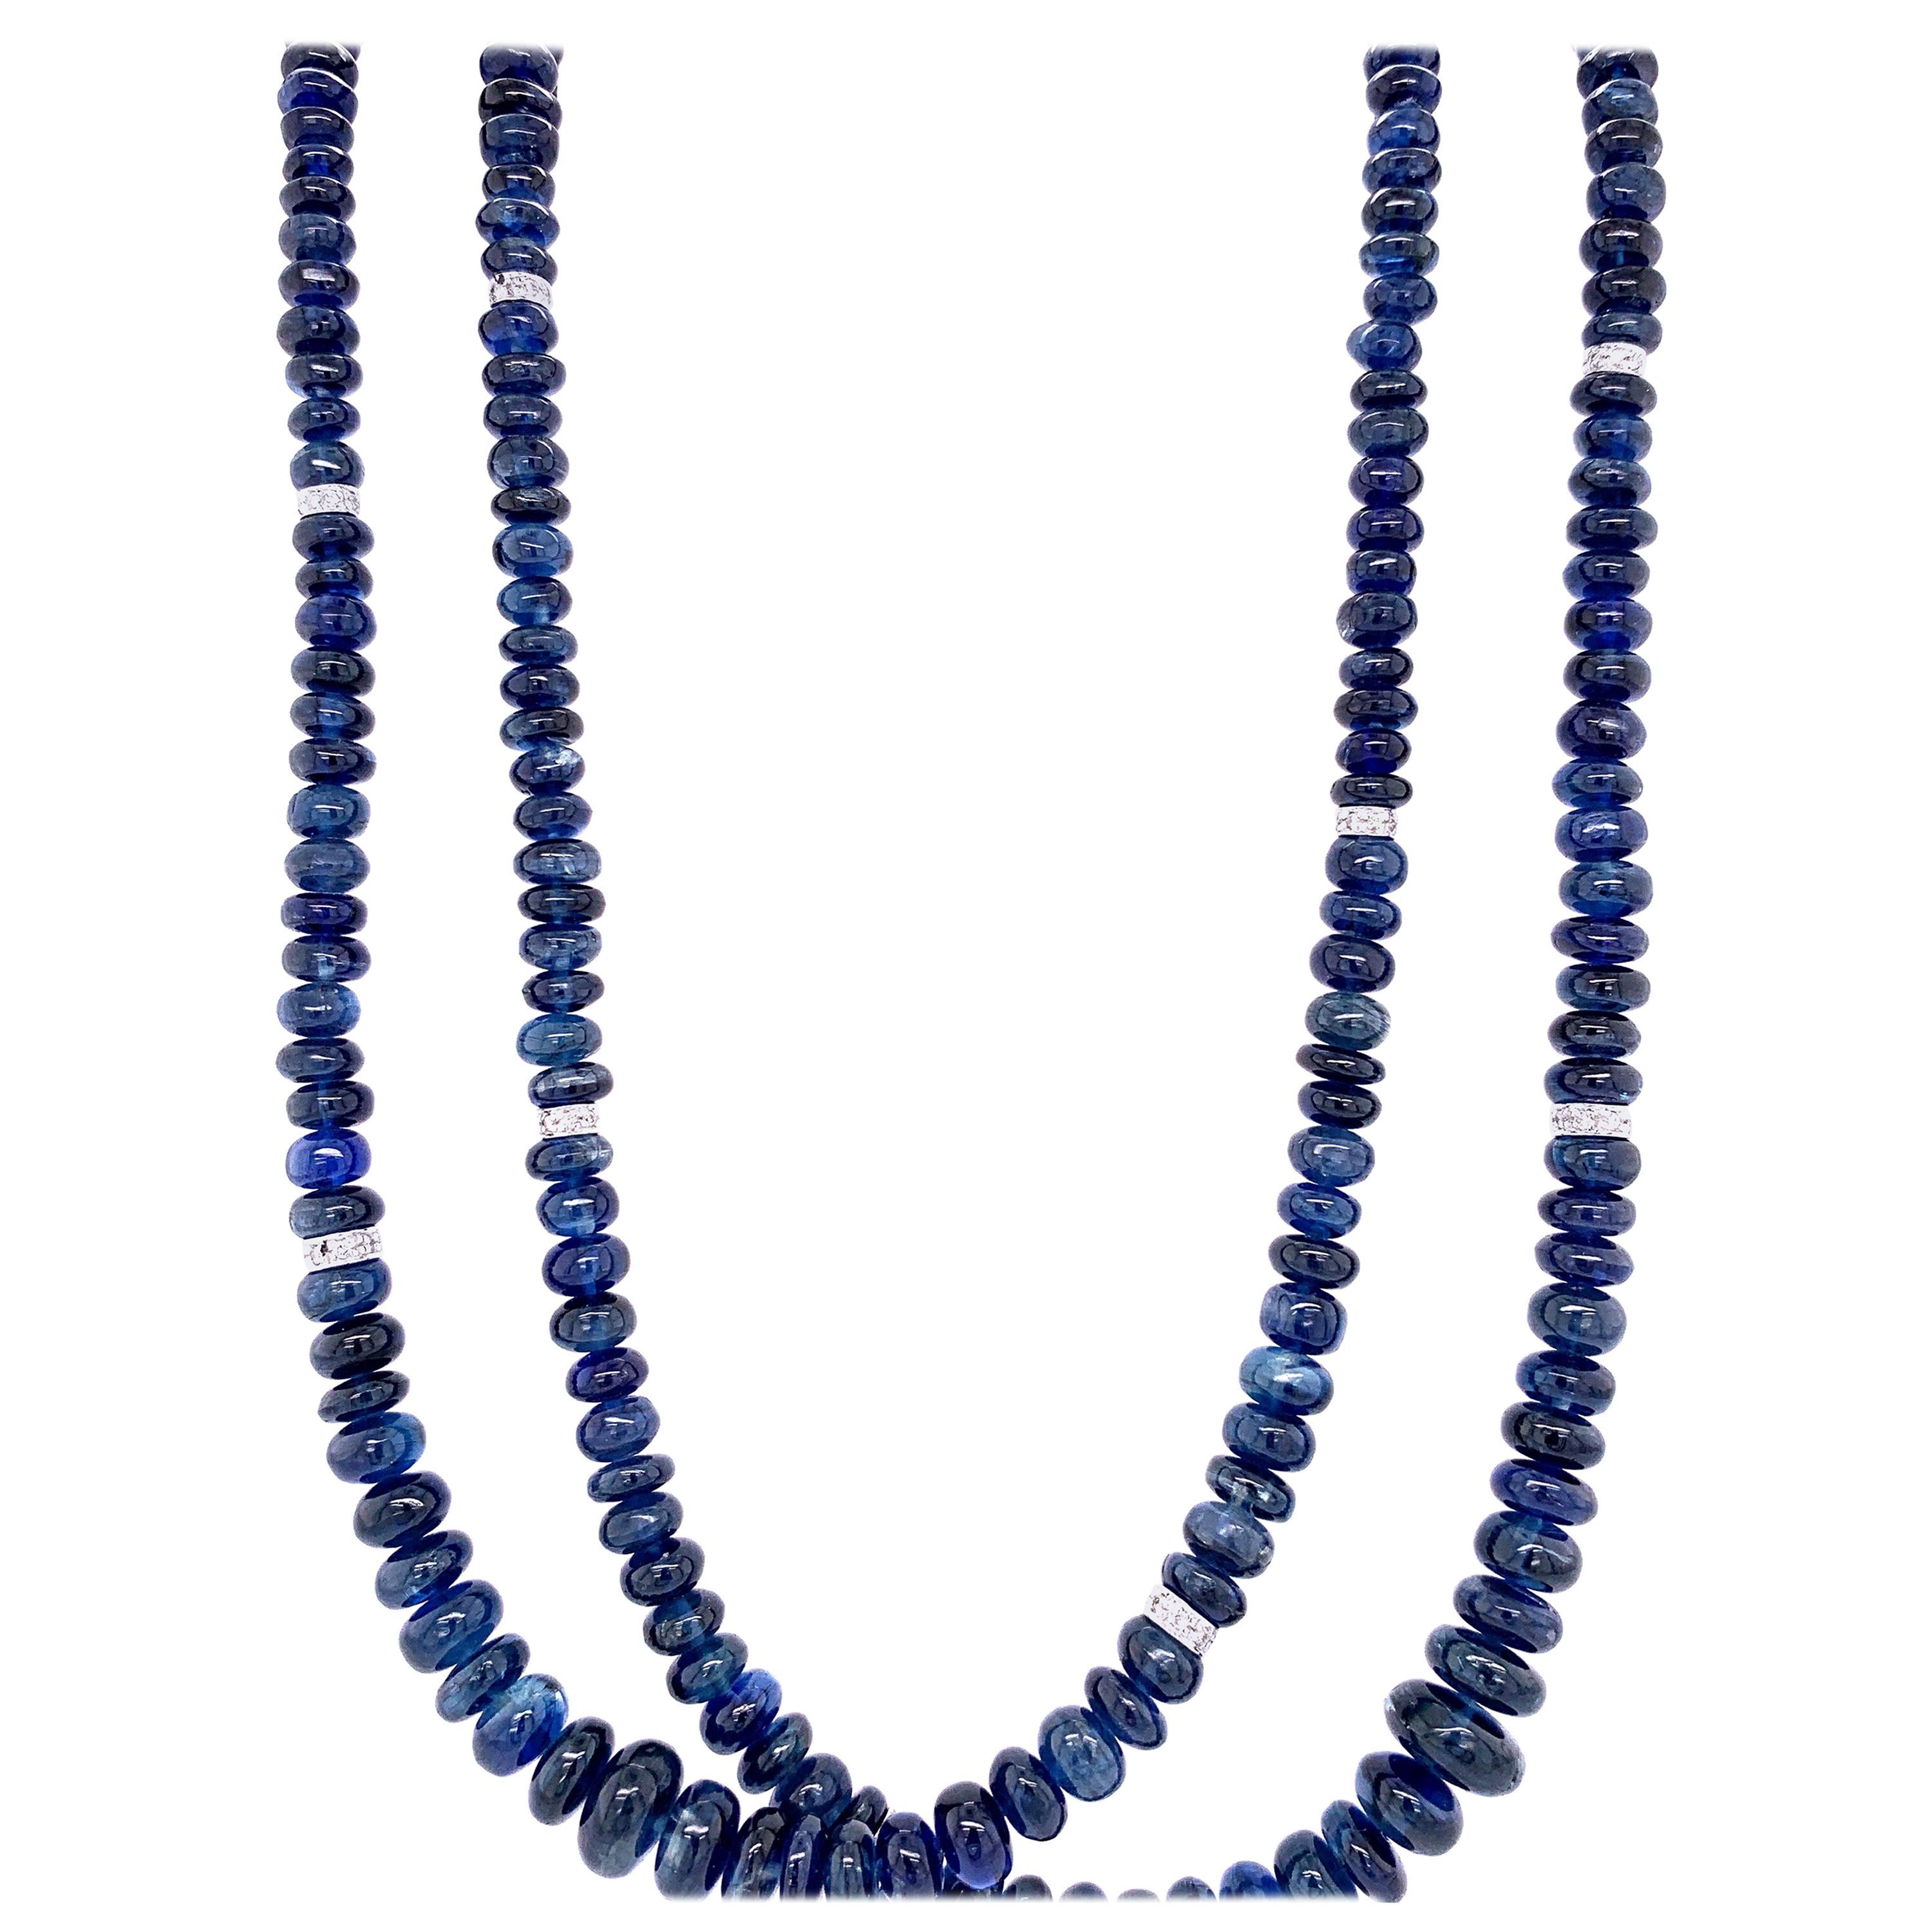 583.50 CTS EARTH MINED SINGLE STRAND OVAL CUT RICH BLUE SAPPHIRE BEADS NECKLACE 